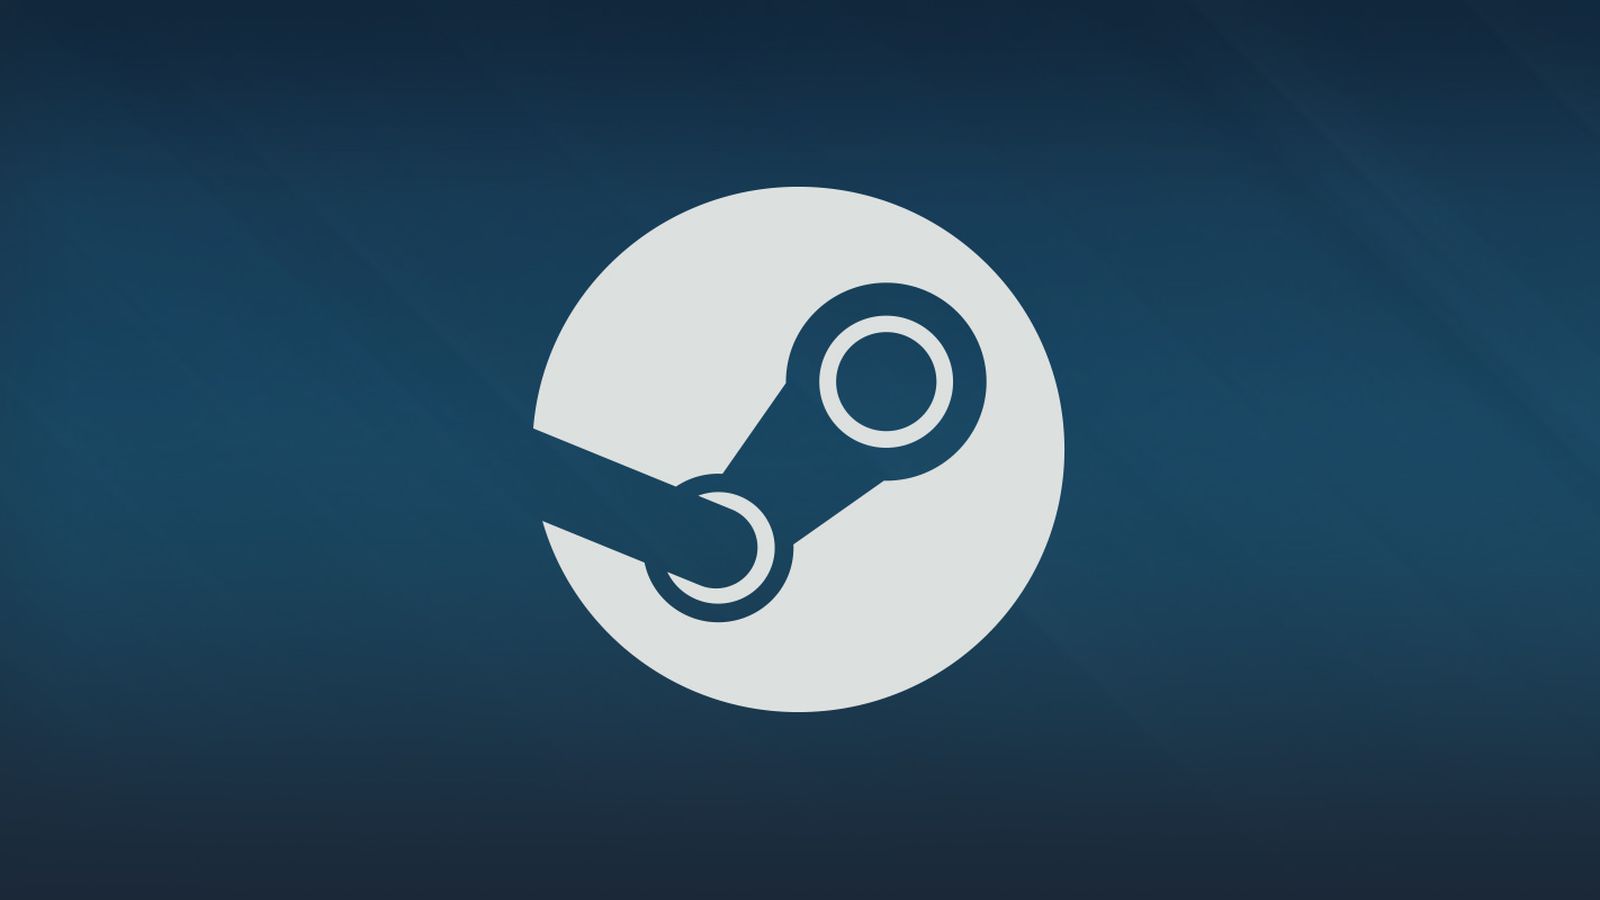 Image for Steam has more monthly active users than both Xbox and PlayStation